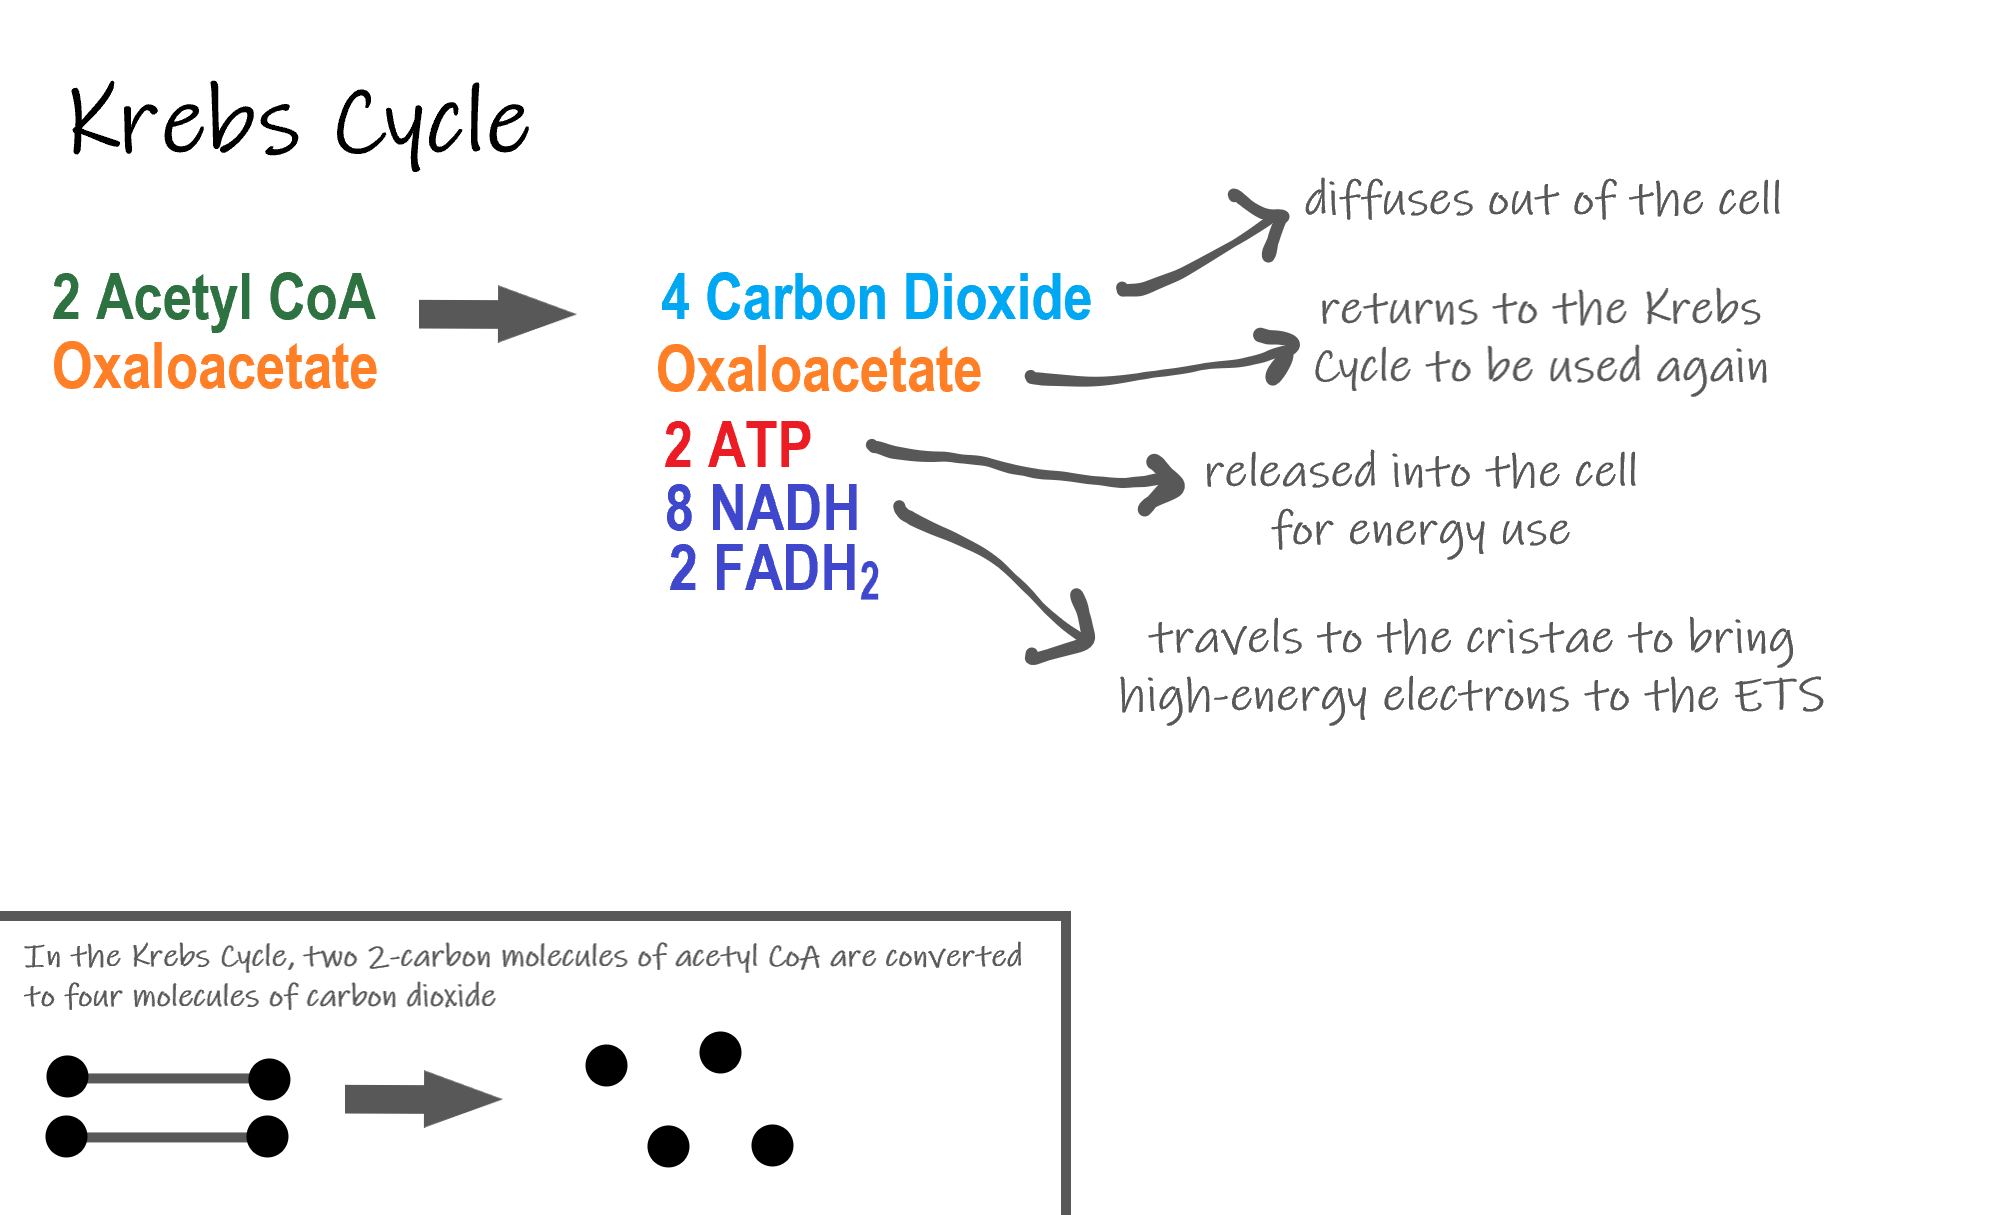 Image shows a diagram of the reactants and products of the Krebs Cycle. Two molecules of acetyl CoA are converted to 4 carbon dioxide which are released as cellular waste, 2 ATP which are used in the cell for energy, and 8 NADH and 2 FADH2, both of which travel to the ETS.